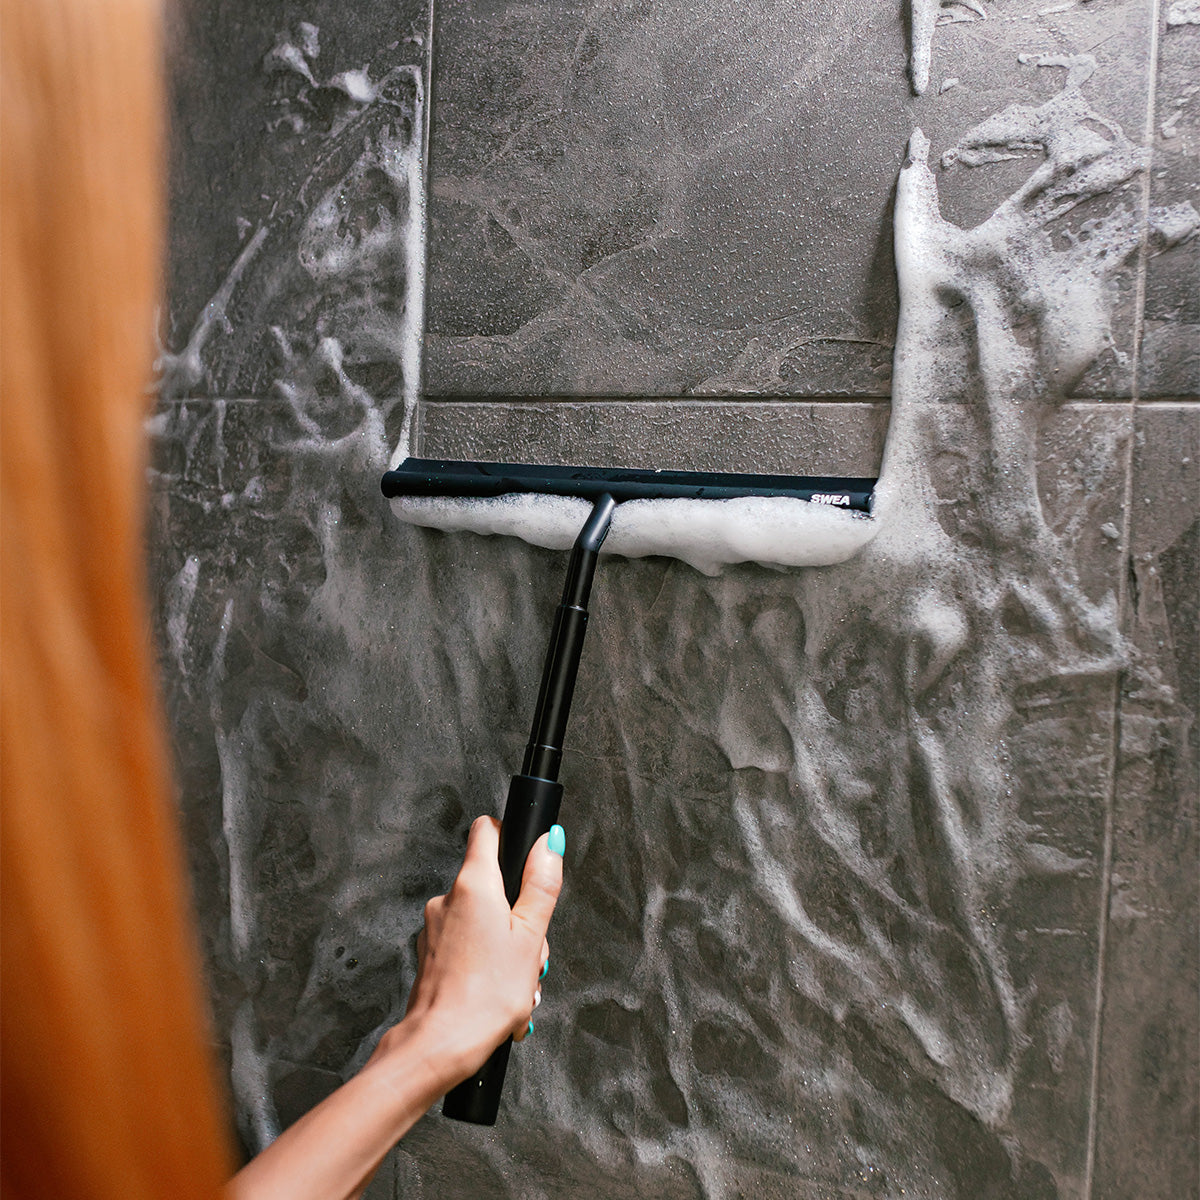 An individual cleaning a shower tiles using the black SWEA squeegee.